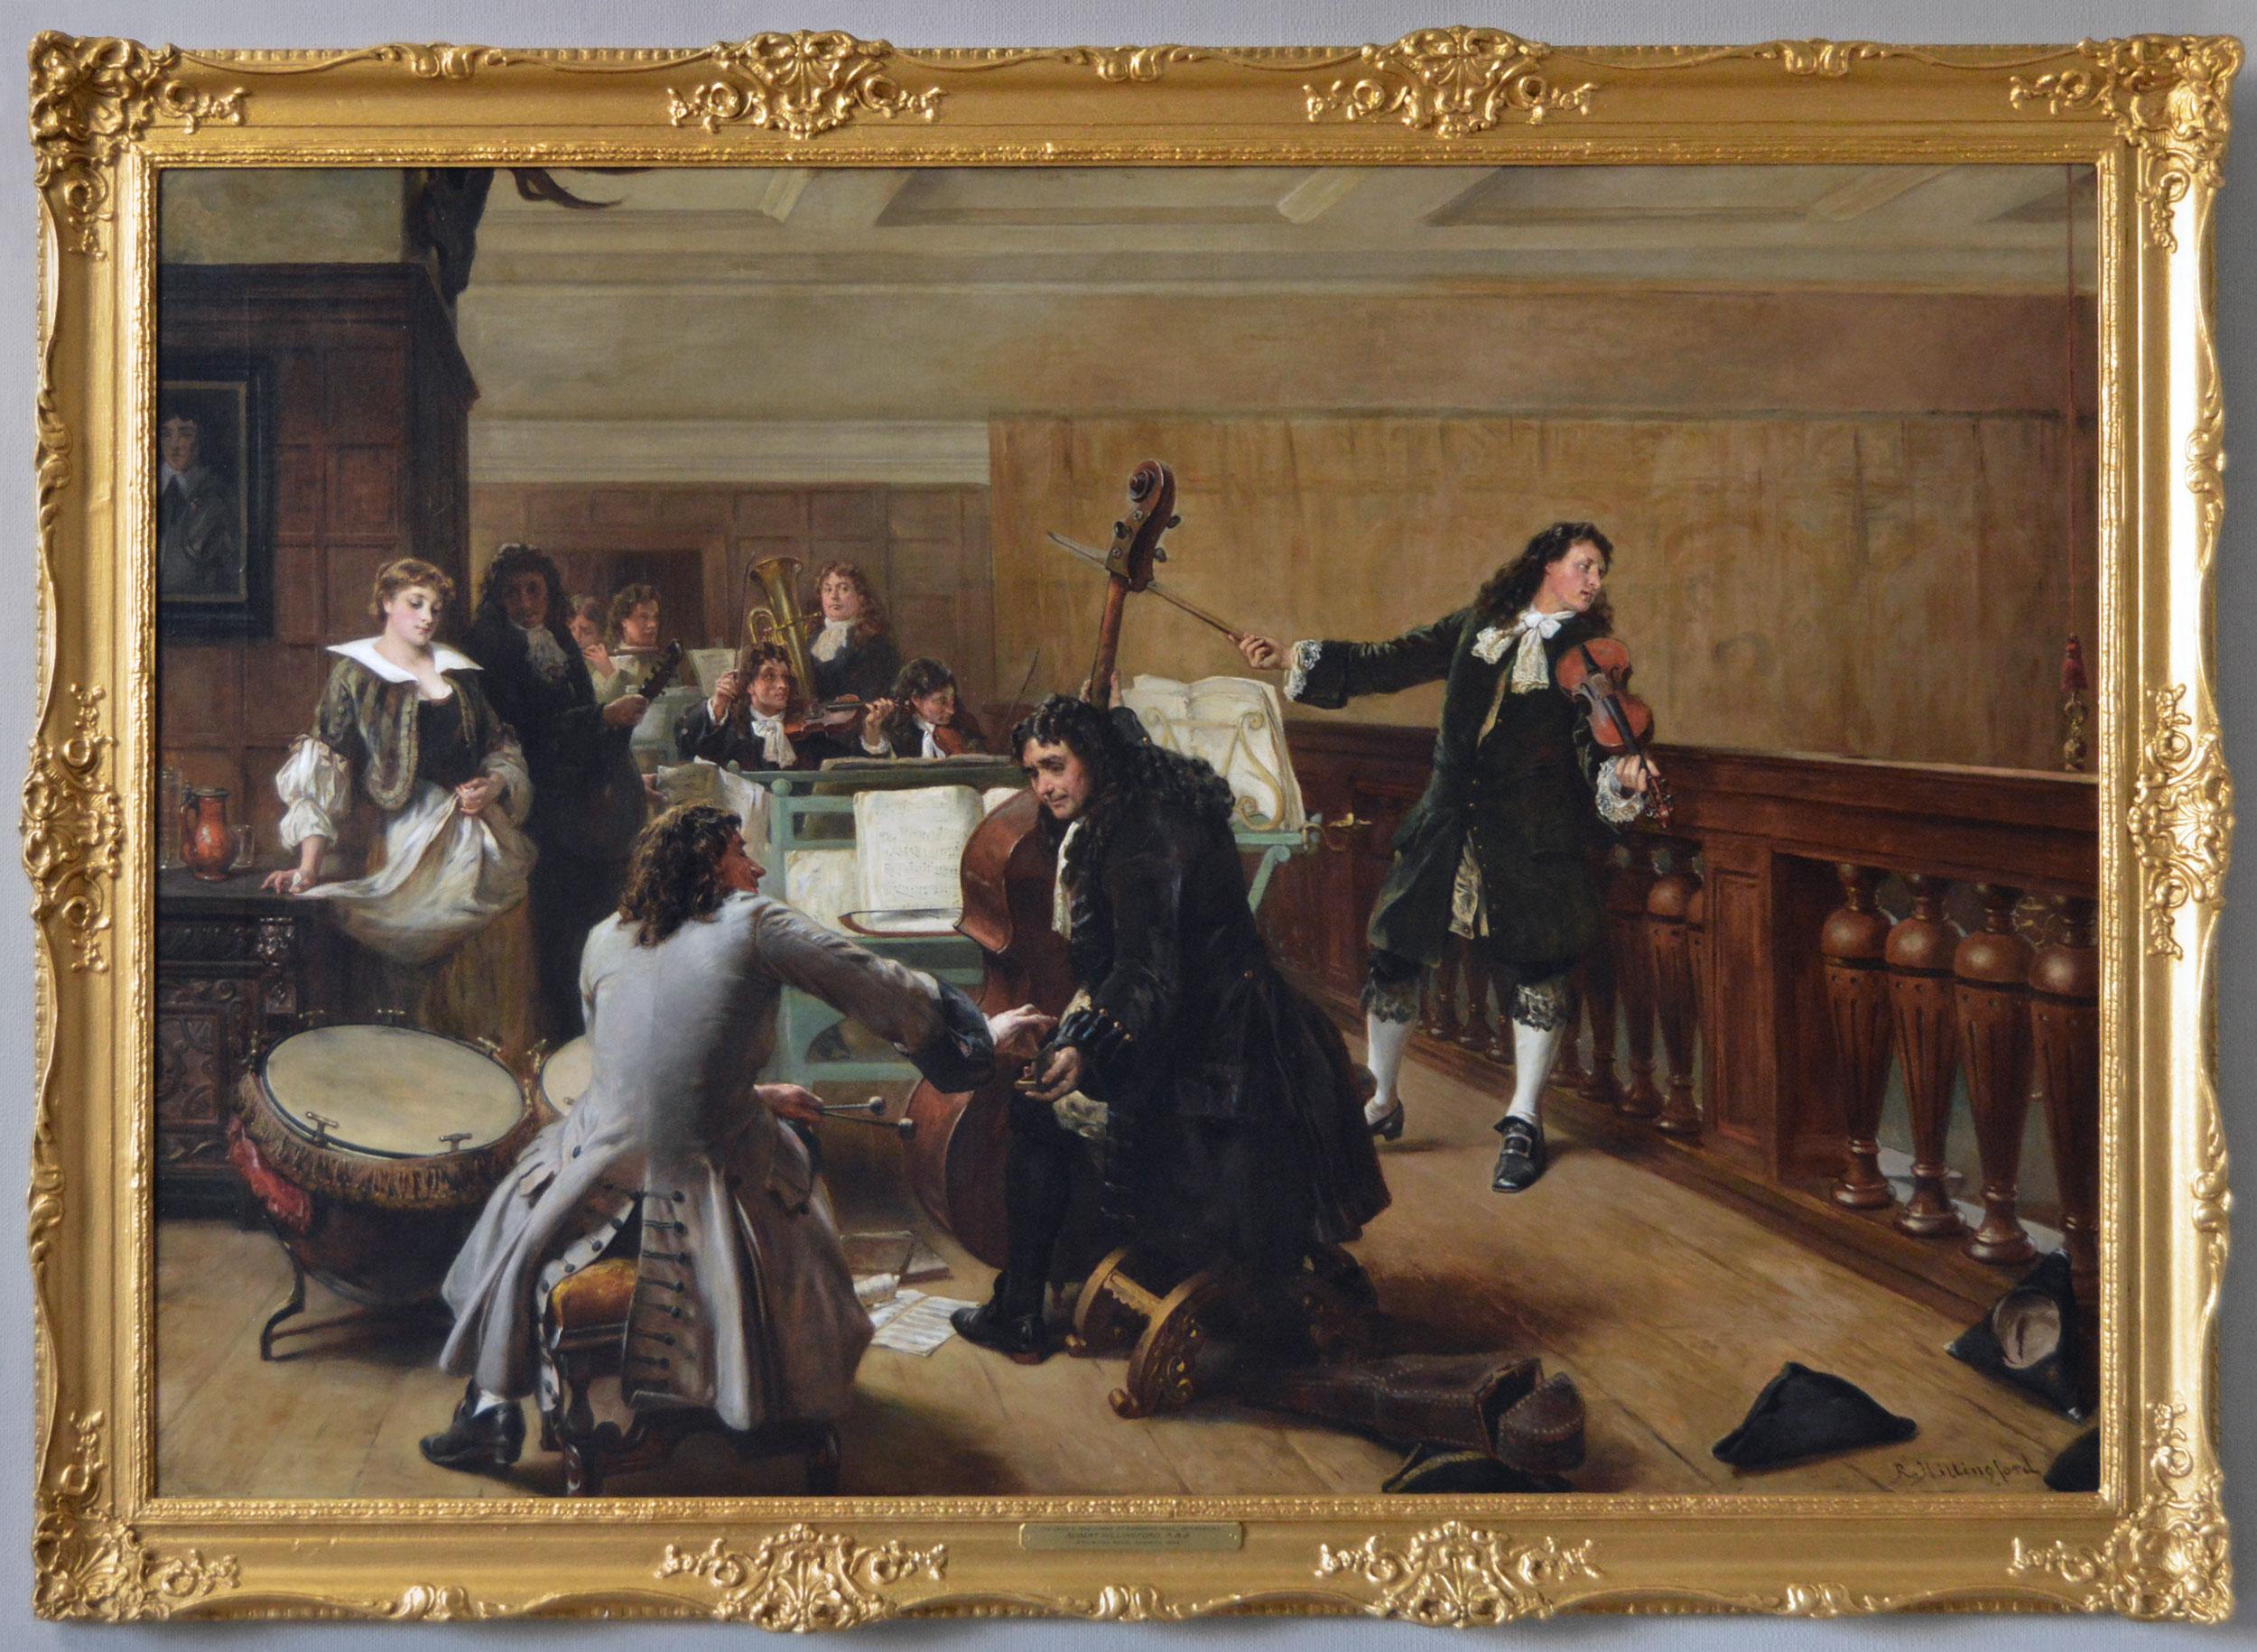 Large scale 19th Century historical genre oil painting of a group of musicians